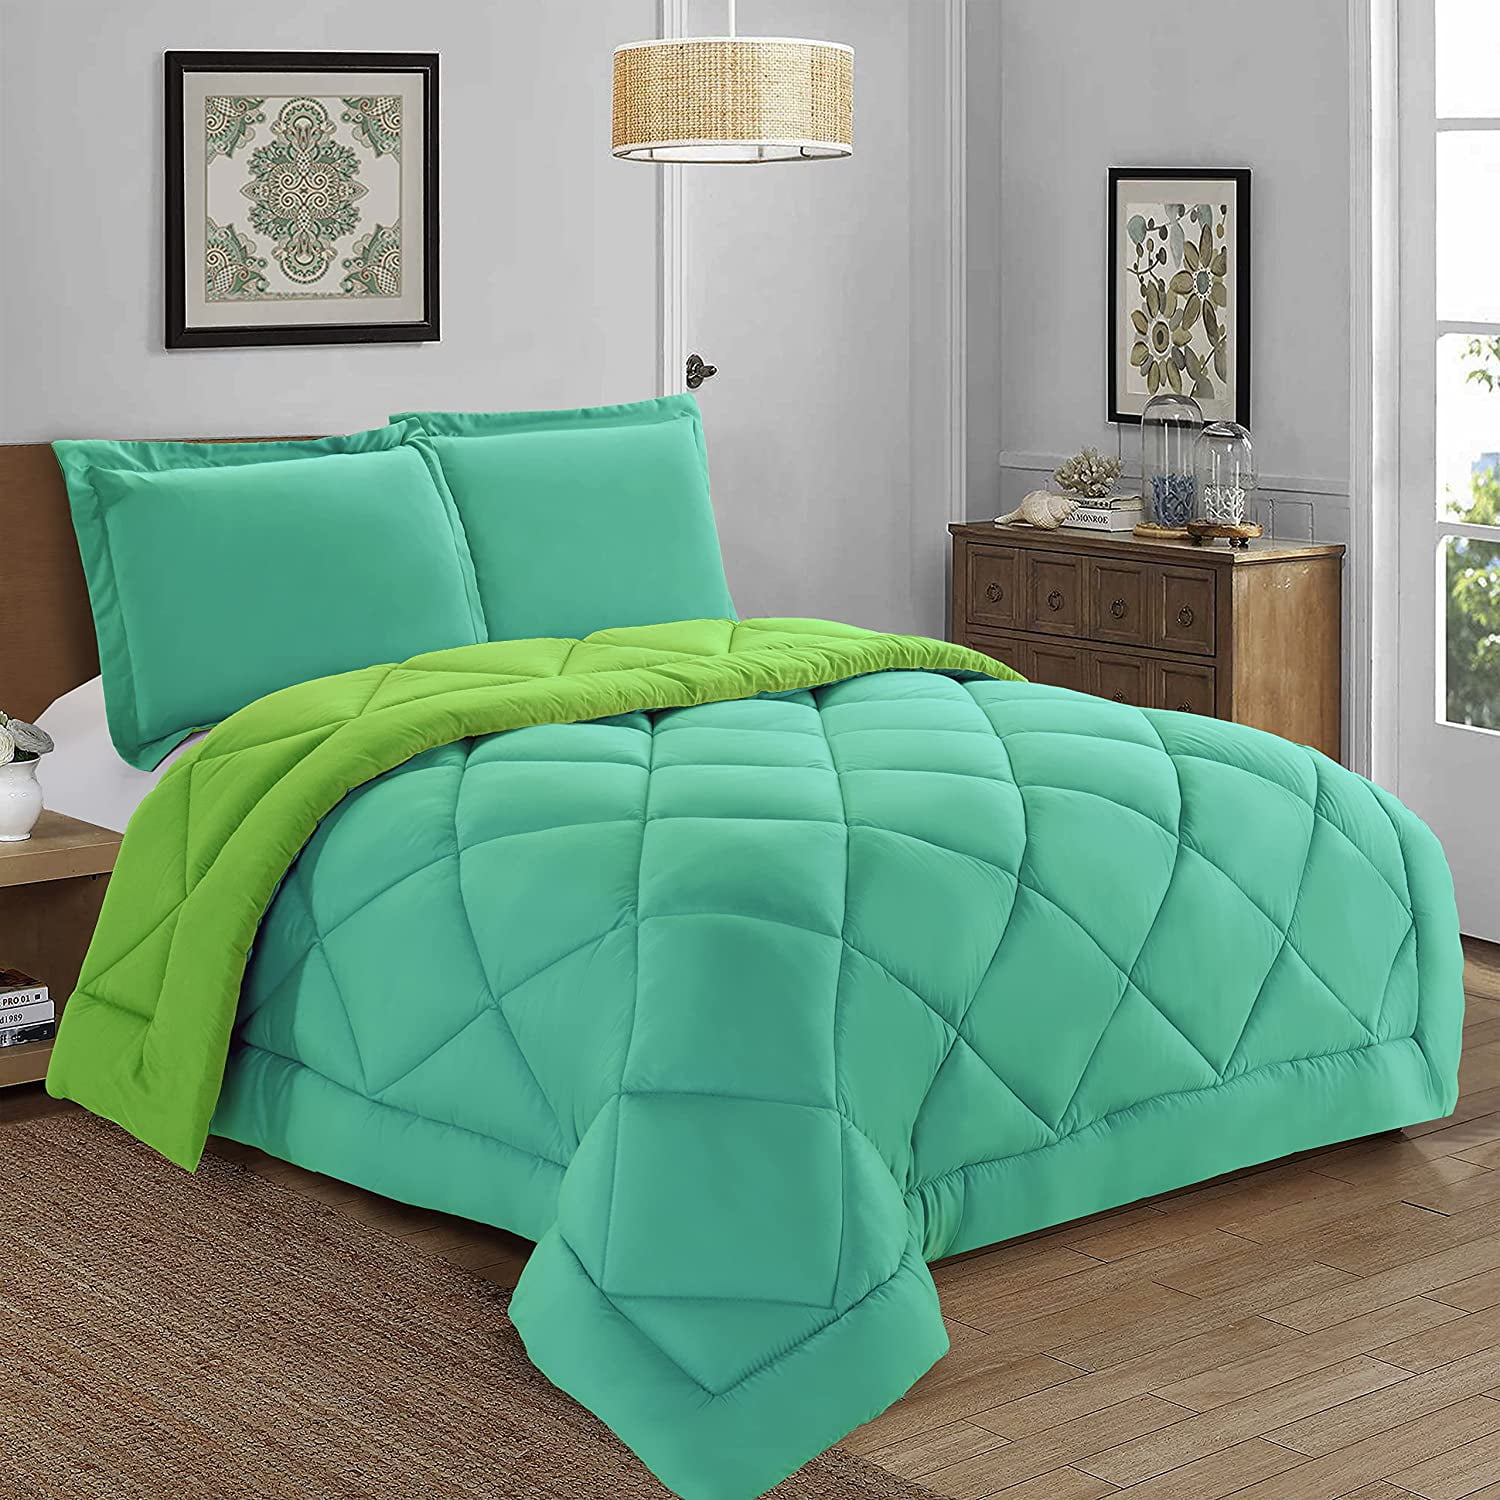 High Quality 3-Piece Reversible Comforter Set, All Season Suitable,  Box-Stitched Down Alternative, Twin/Twin XL, Aqua/Lime